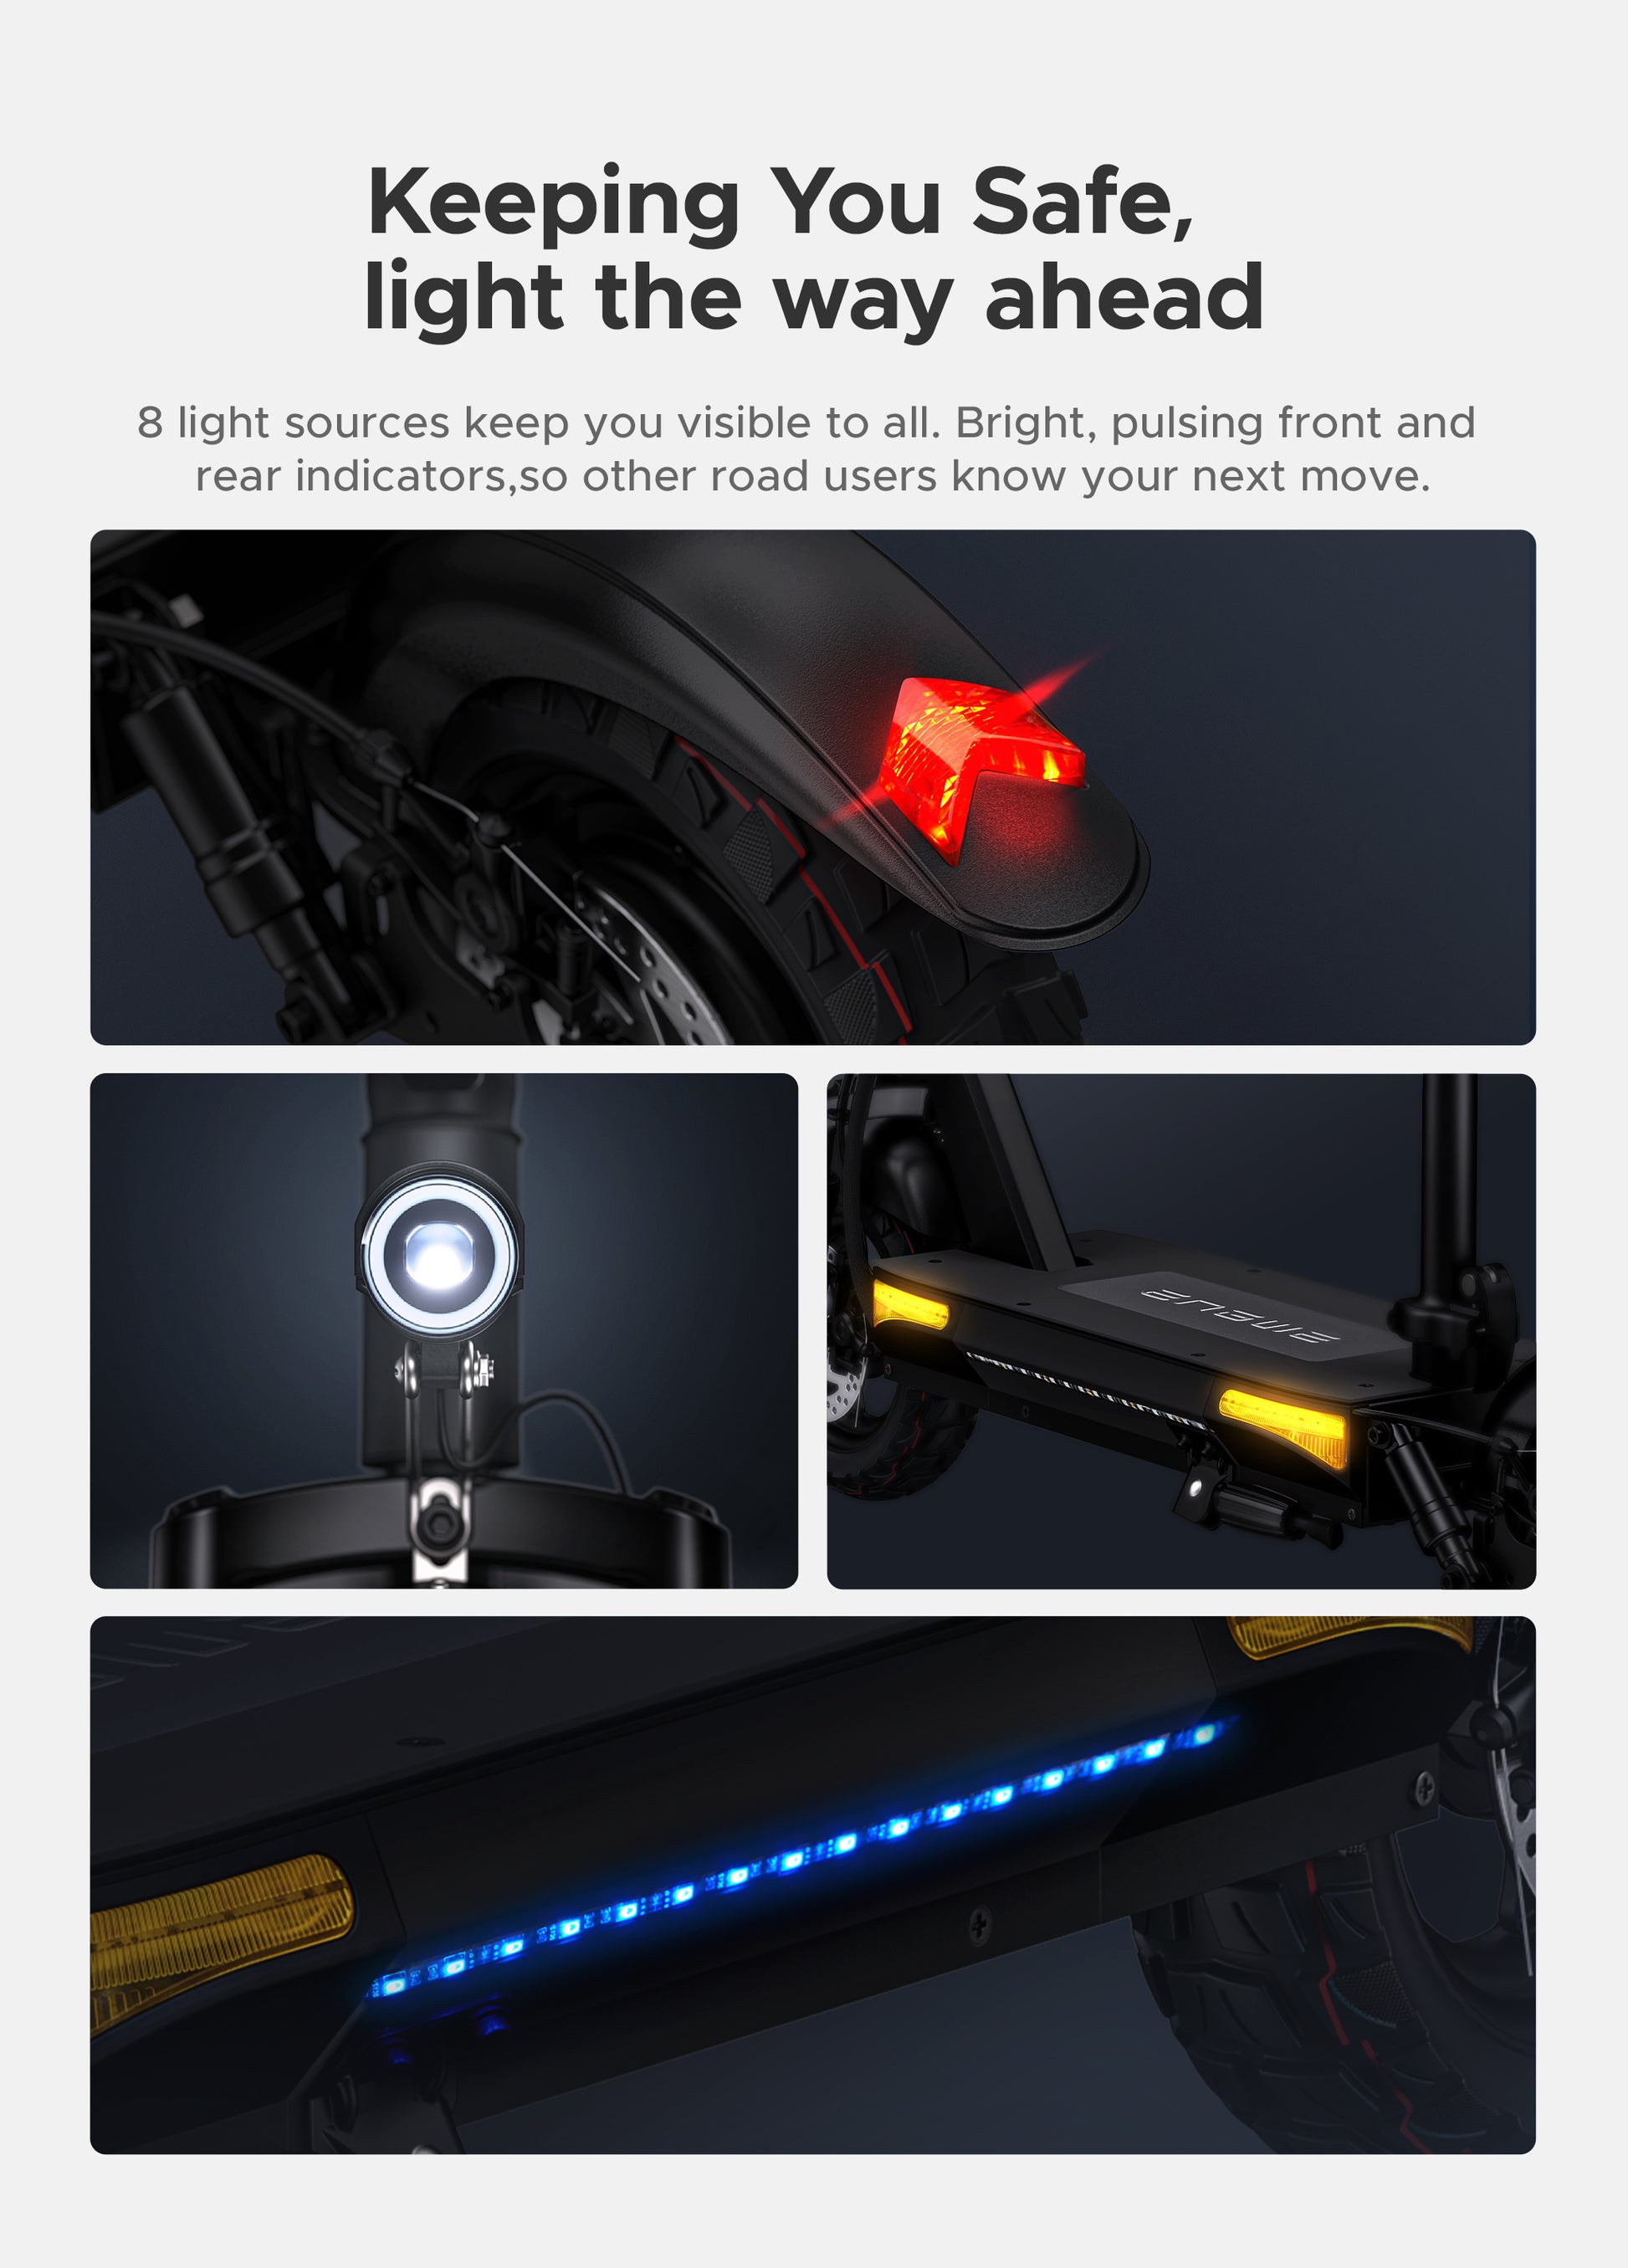 Safety features of Engwe S6 e-scooter with bright lights and indicators for night rides.